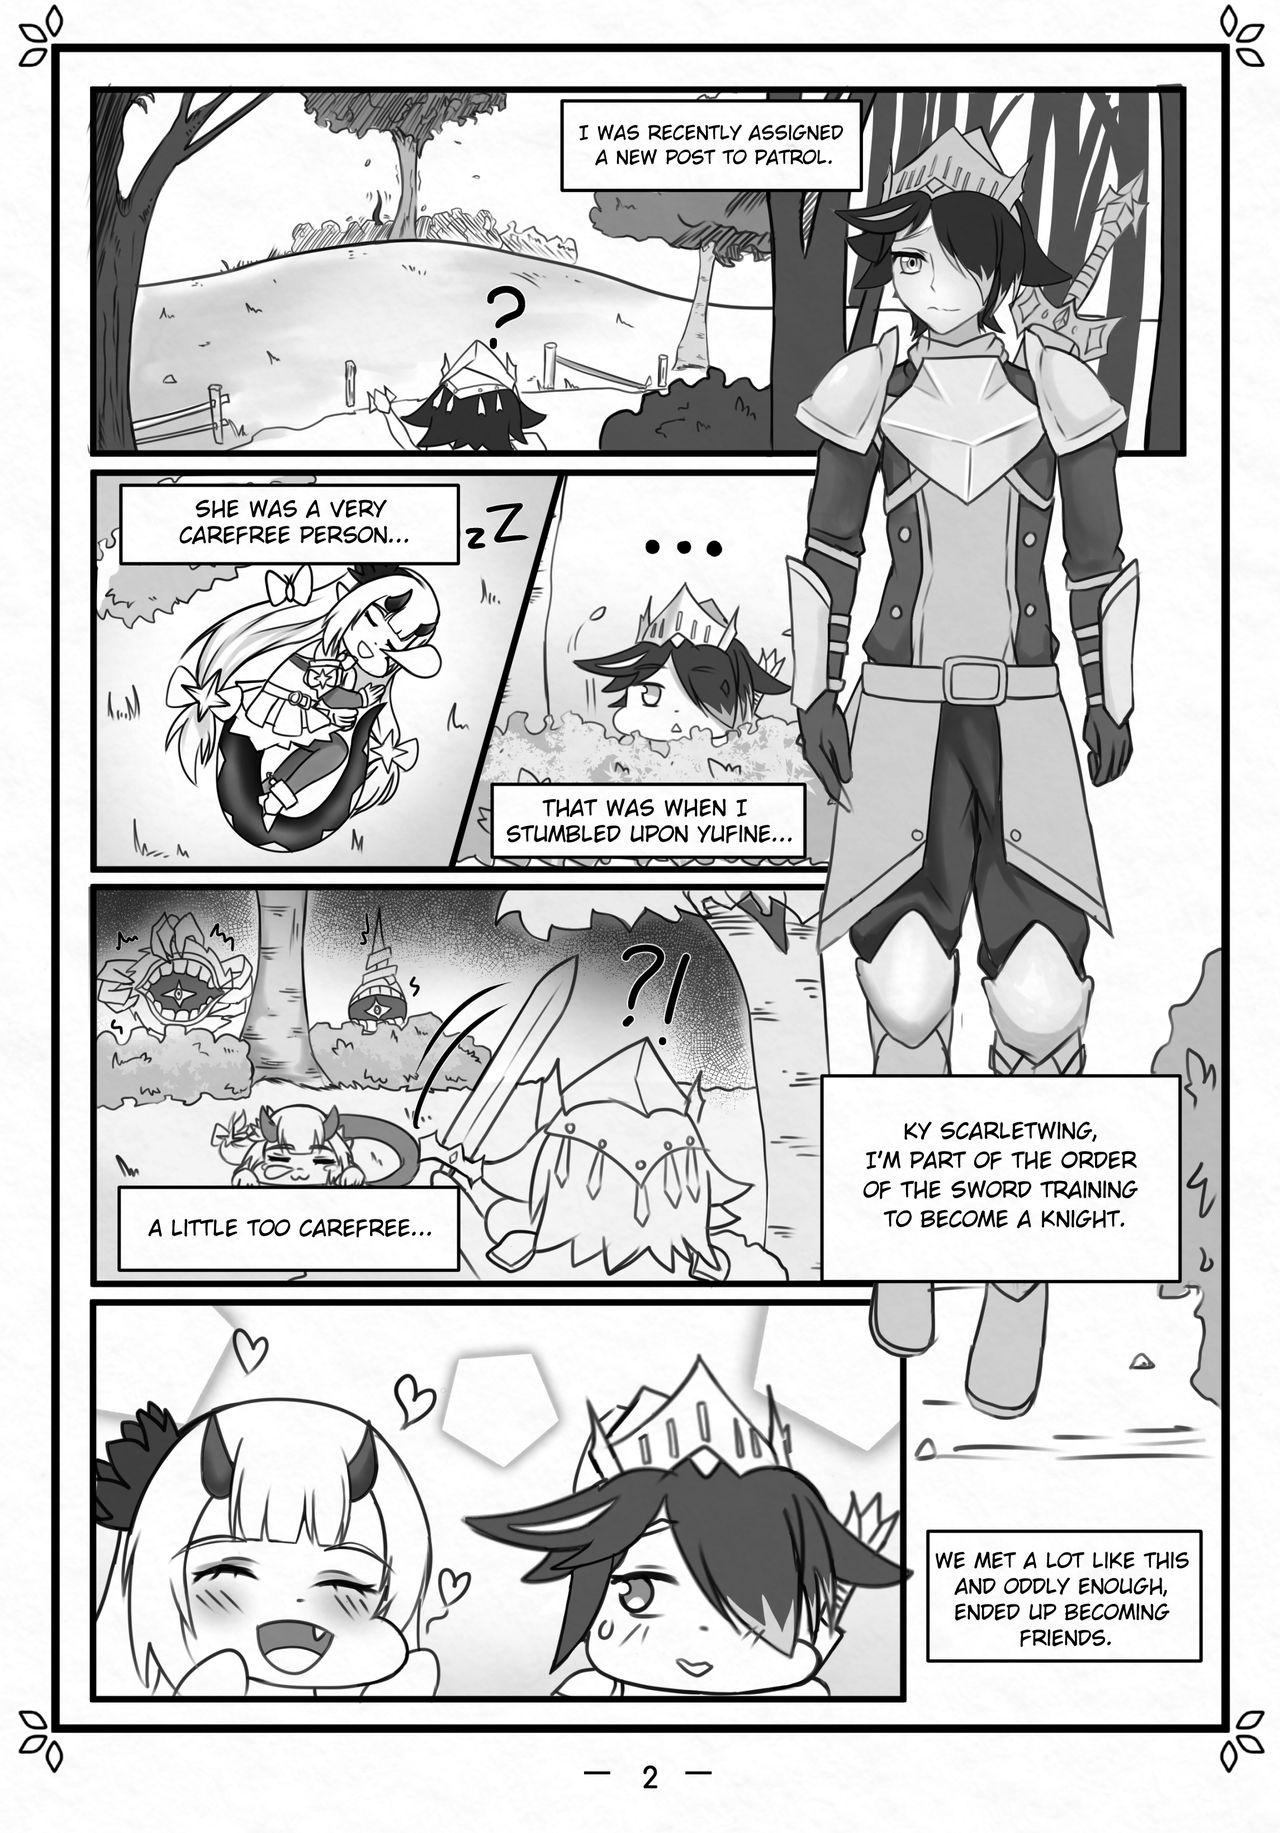 Beurette Blossoming Yufine - Epic seven Old - Page 3